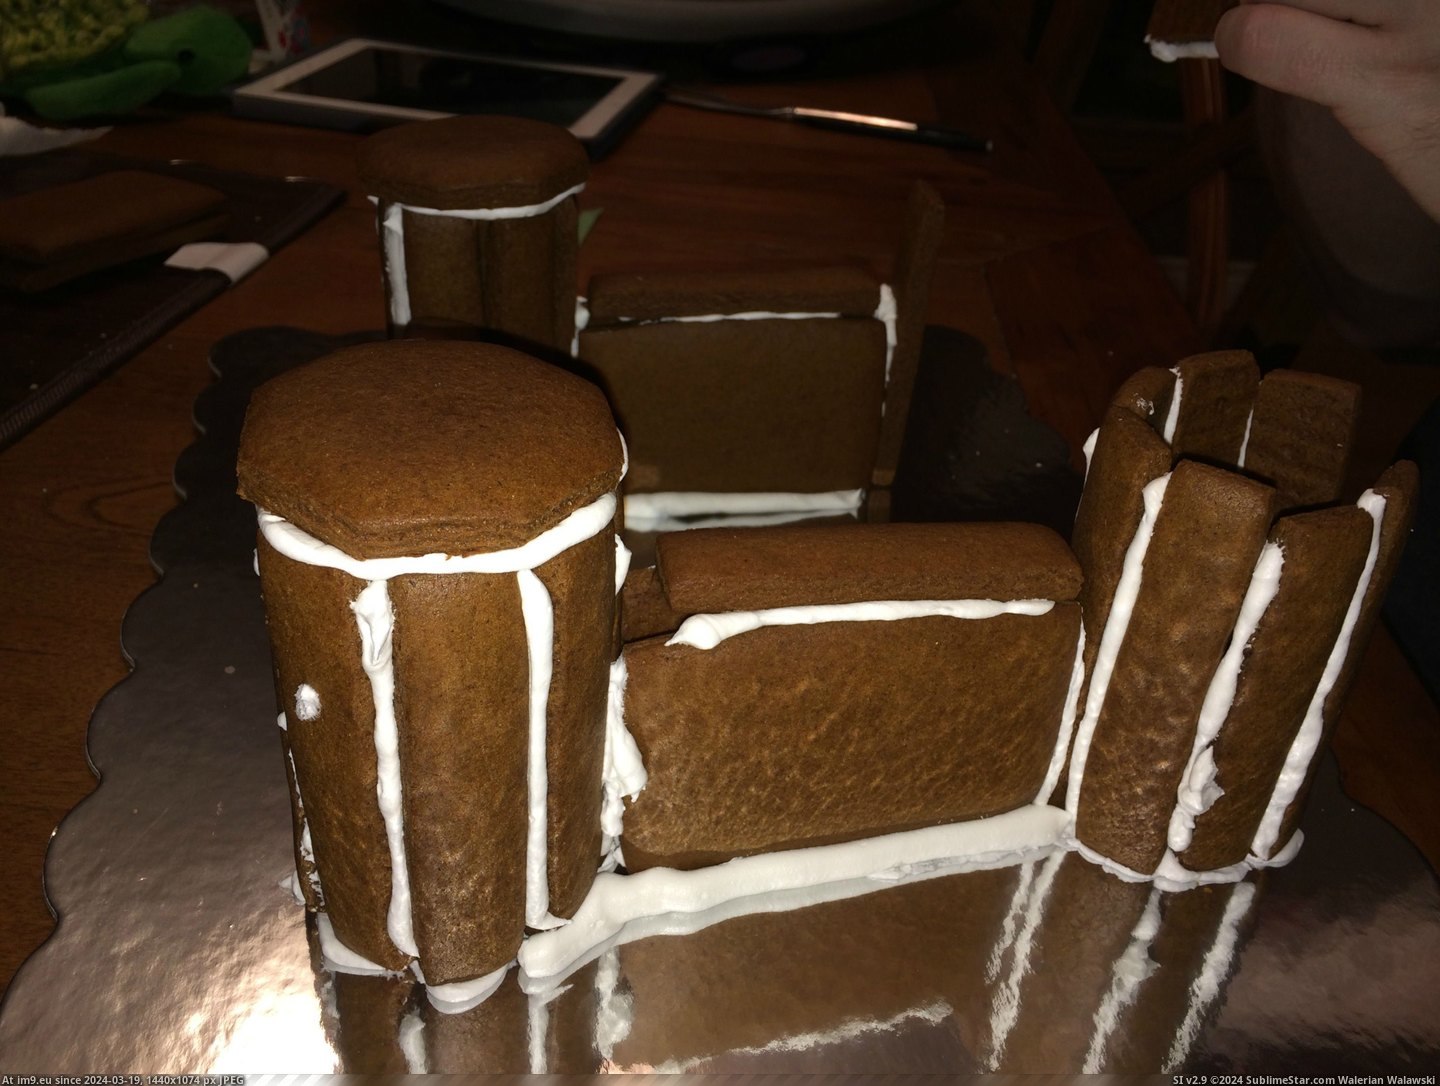 #Husband #Get #Our #Divorced #Collaborated #Project #Gingerbread #Success [Pics] My husband and I collaborated on our first gingerbread project and didn't get divorced...success! 17 Pic. (Bild von album My r/PICS favs))